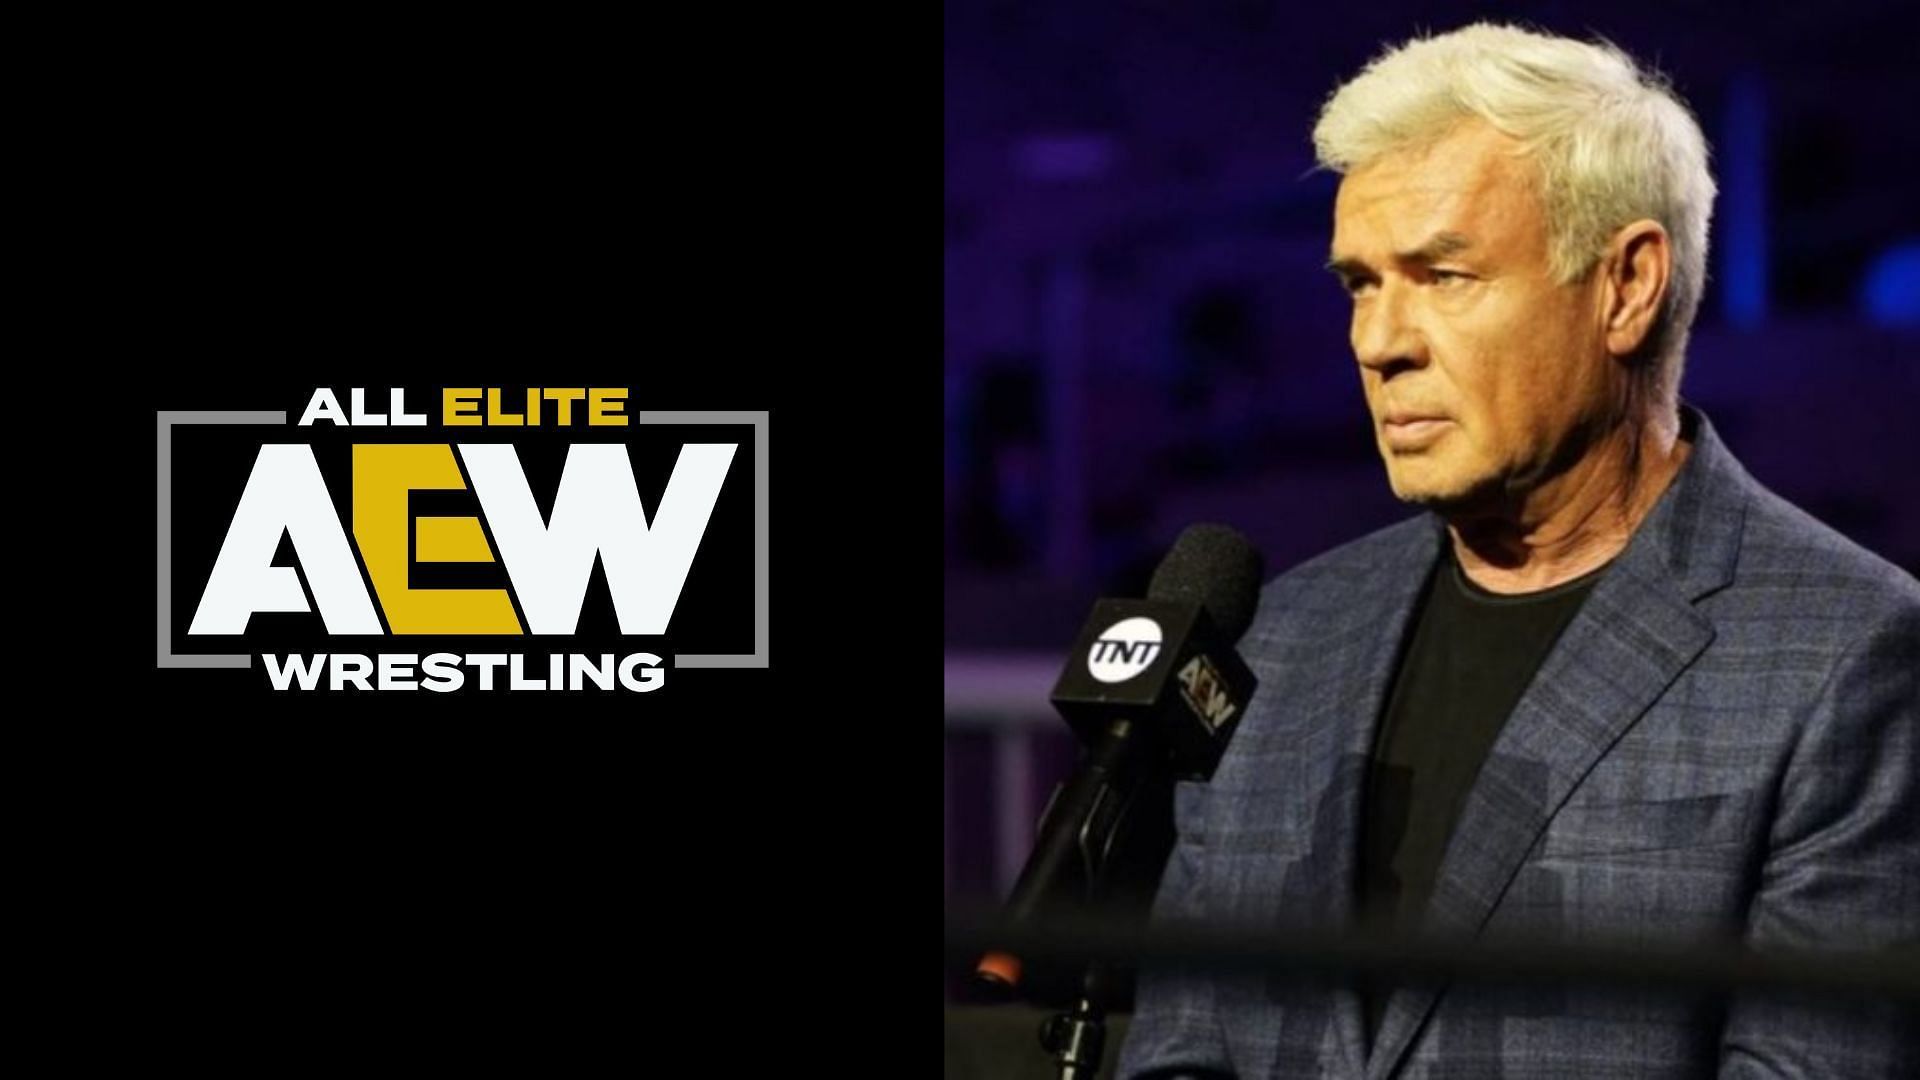 Eric Bischoff believes the future is grim for young AEW star